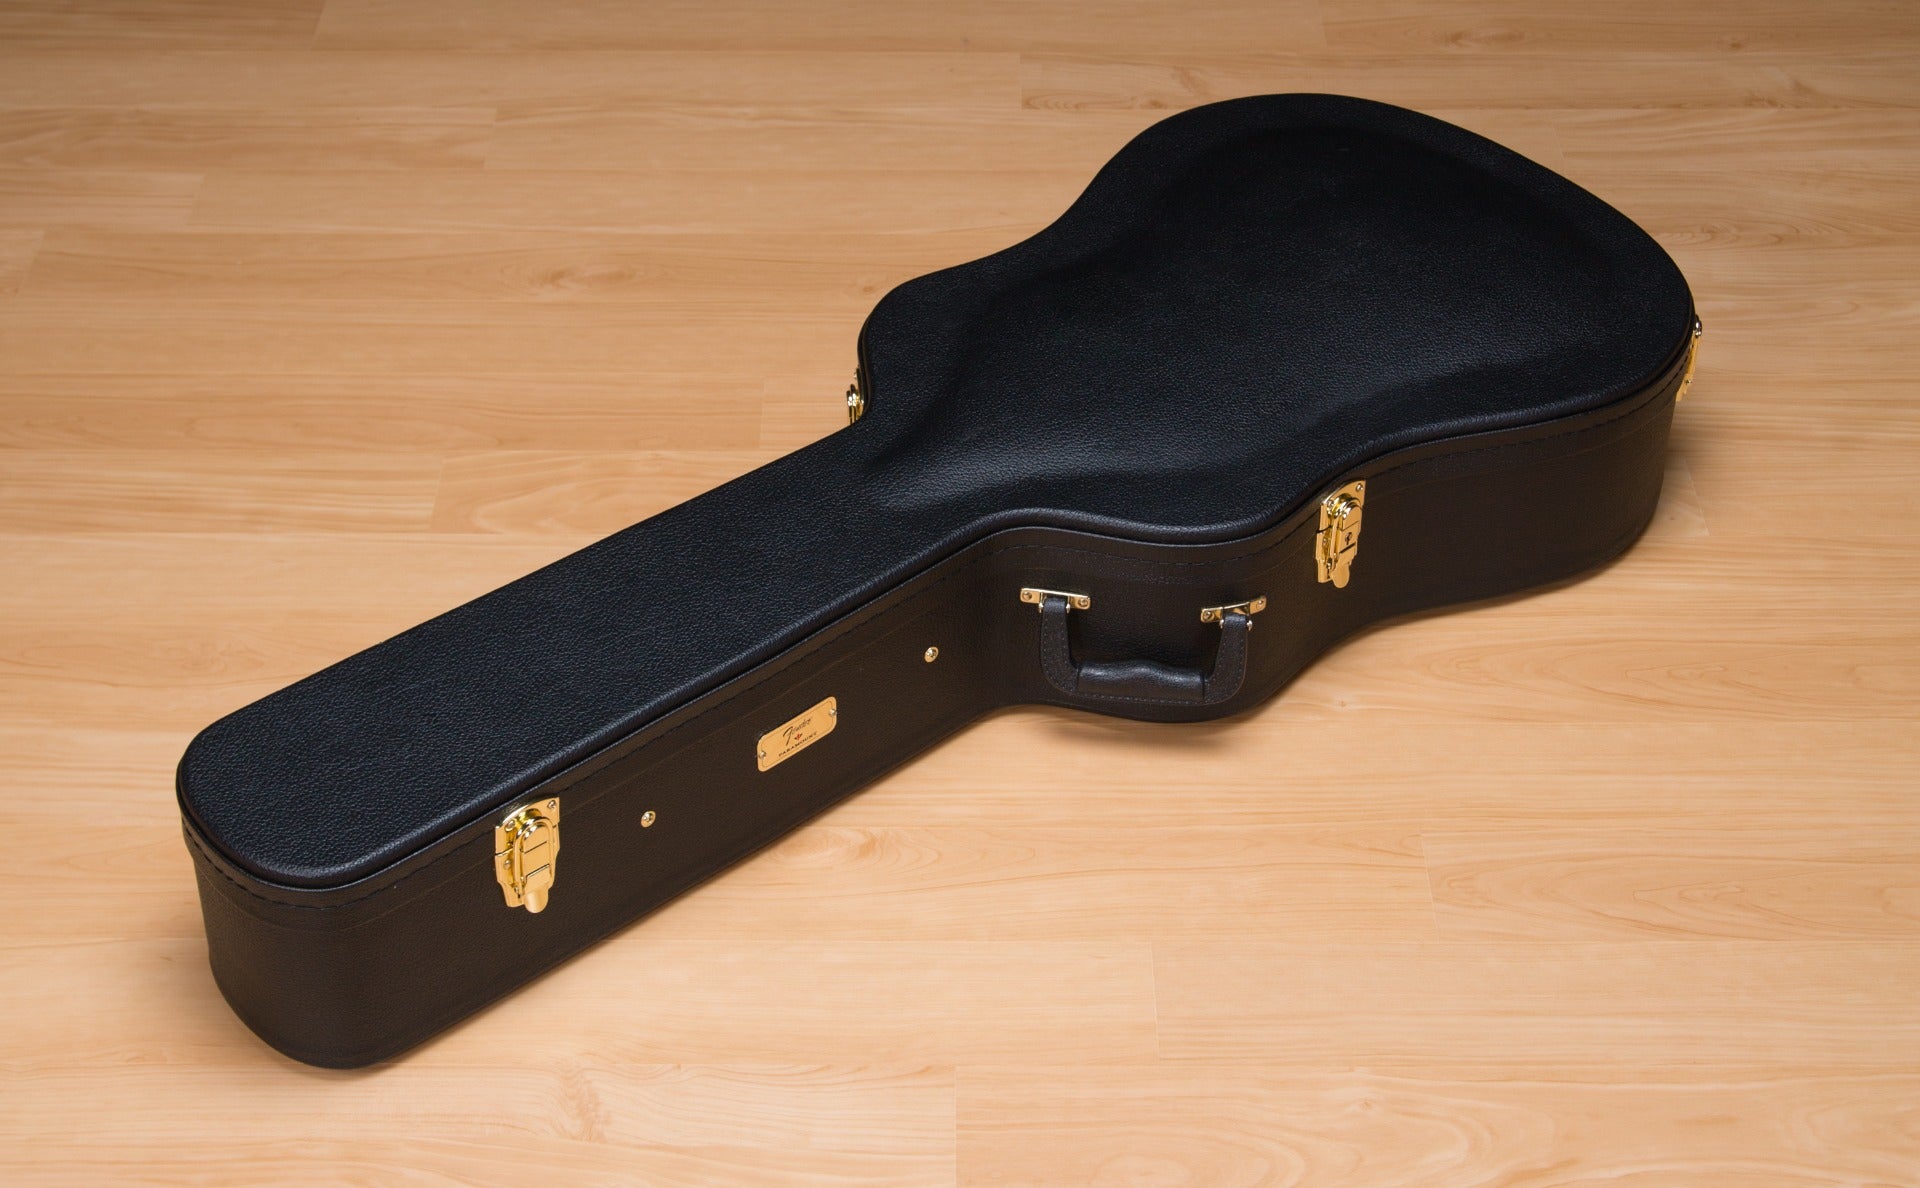 Included guitar case for the Fender Paramount PD-220E Dreadnought Acoustic-Electric Guitar - Ovangkol, Natural view 1